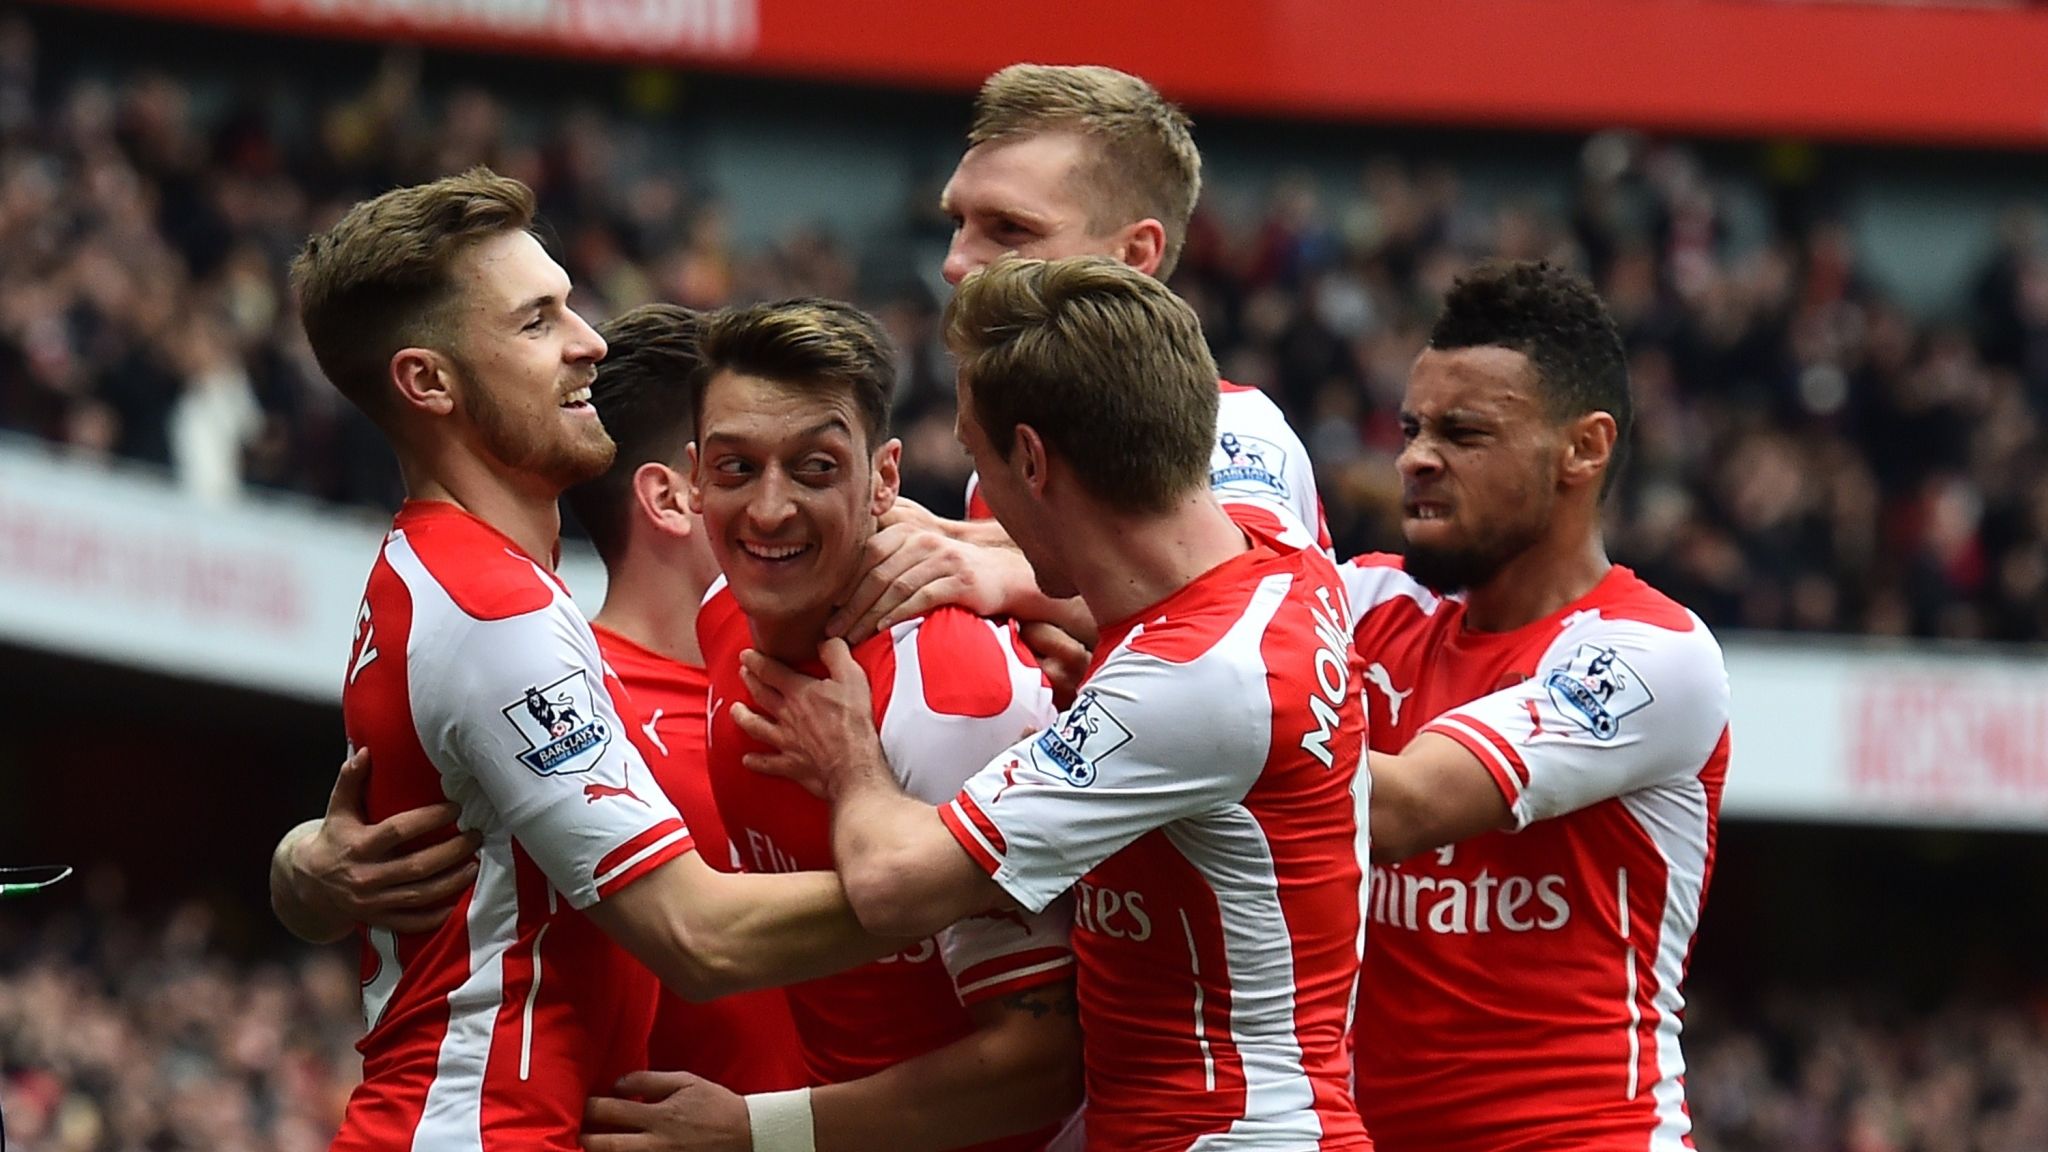 2015/16 ENGLISH SOCCER ARSENAL FC FIXTURE/SCHEDULE